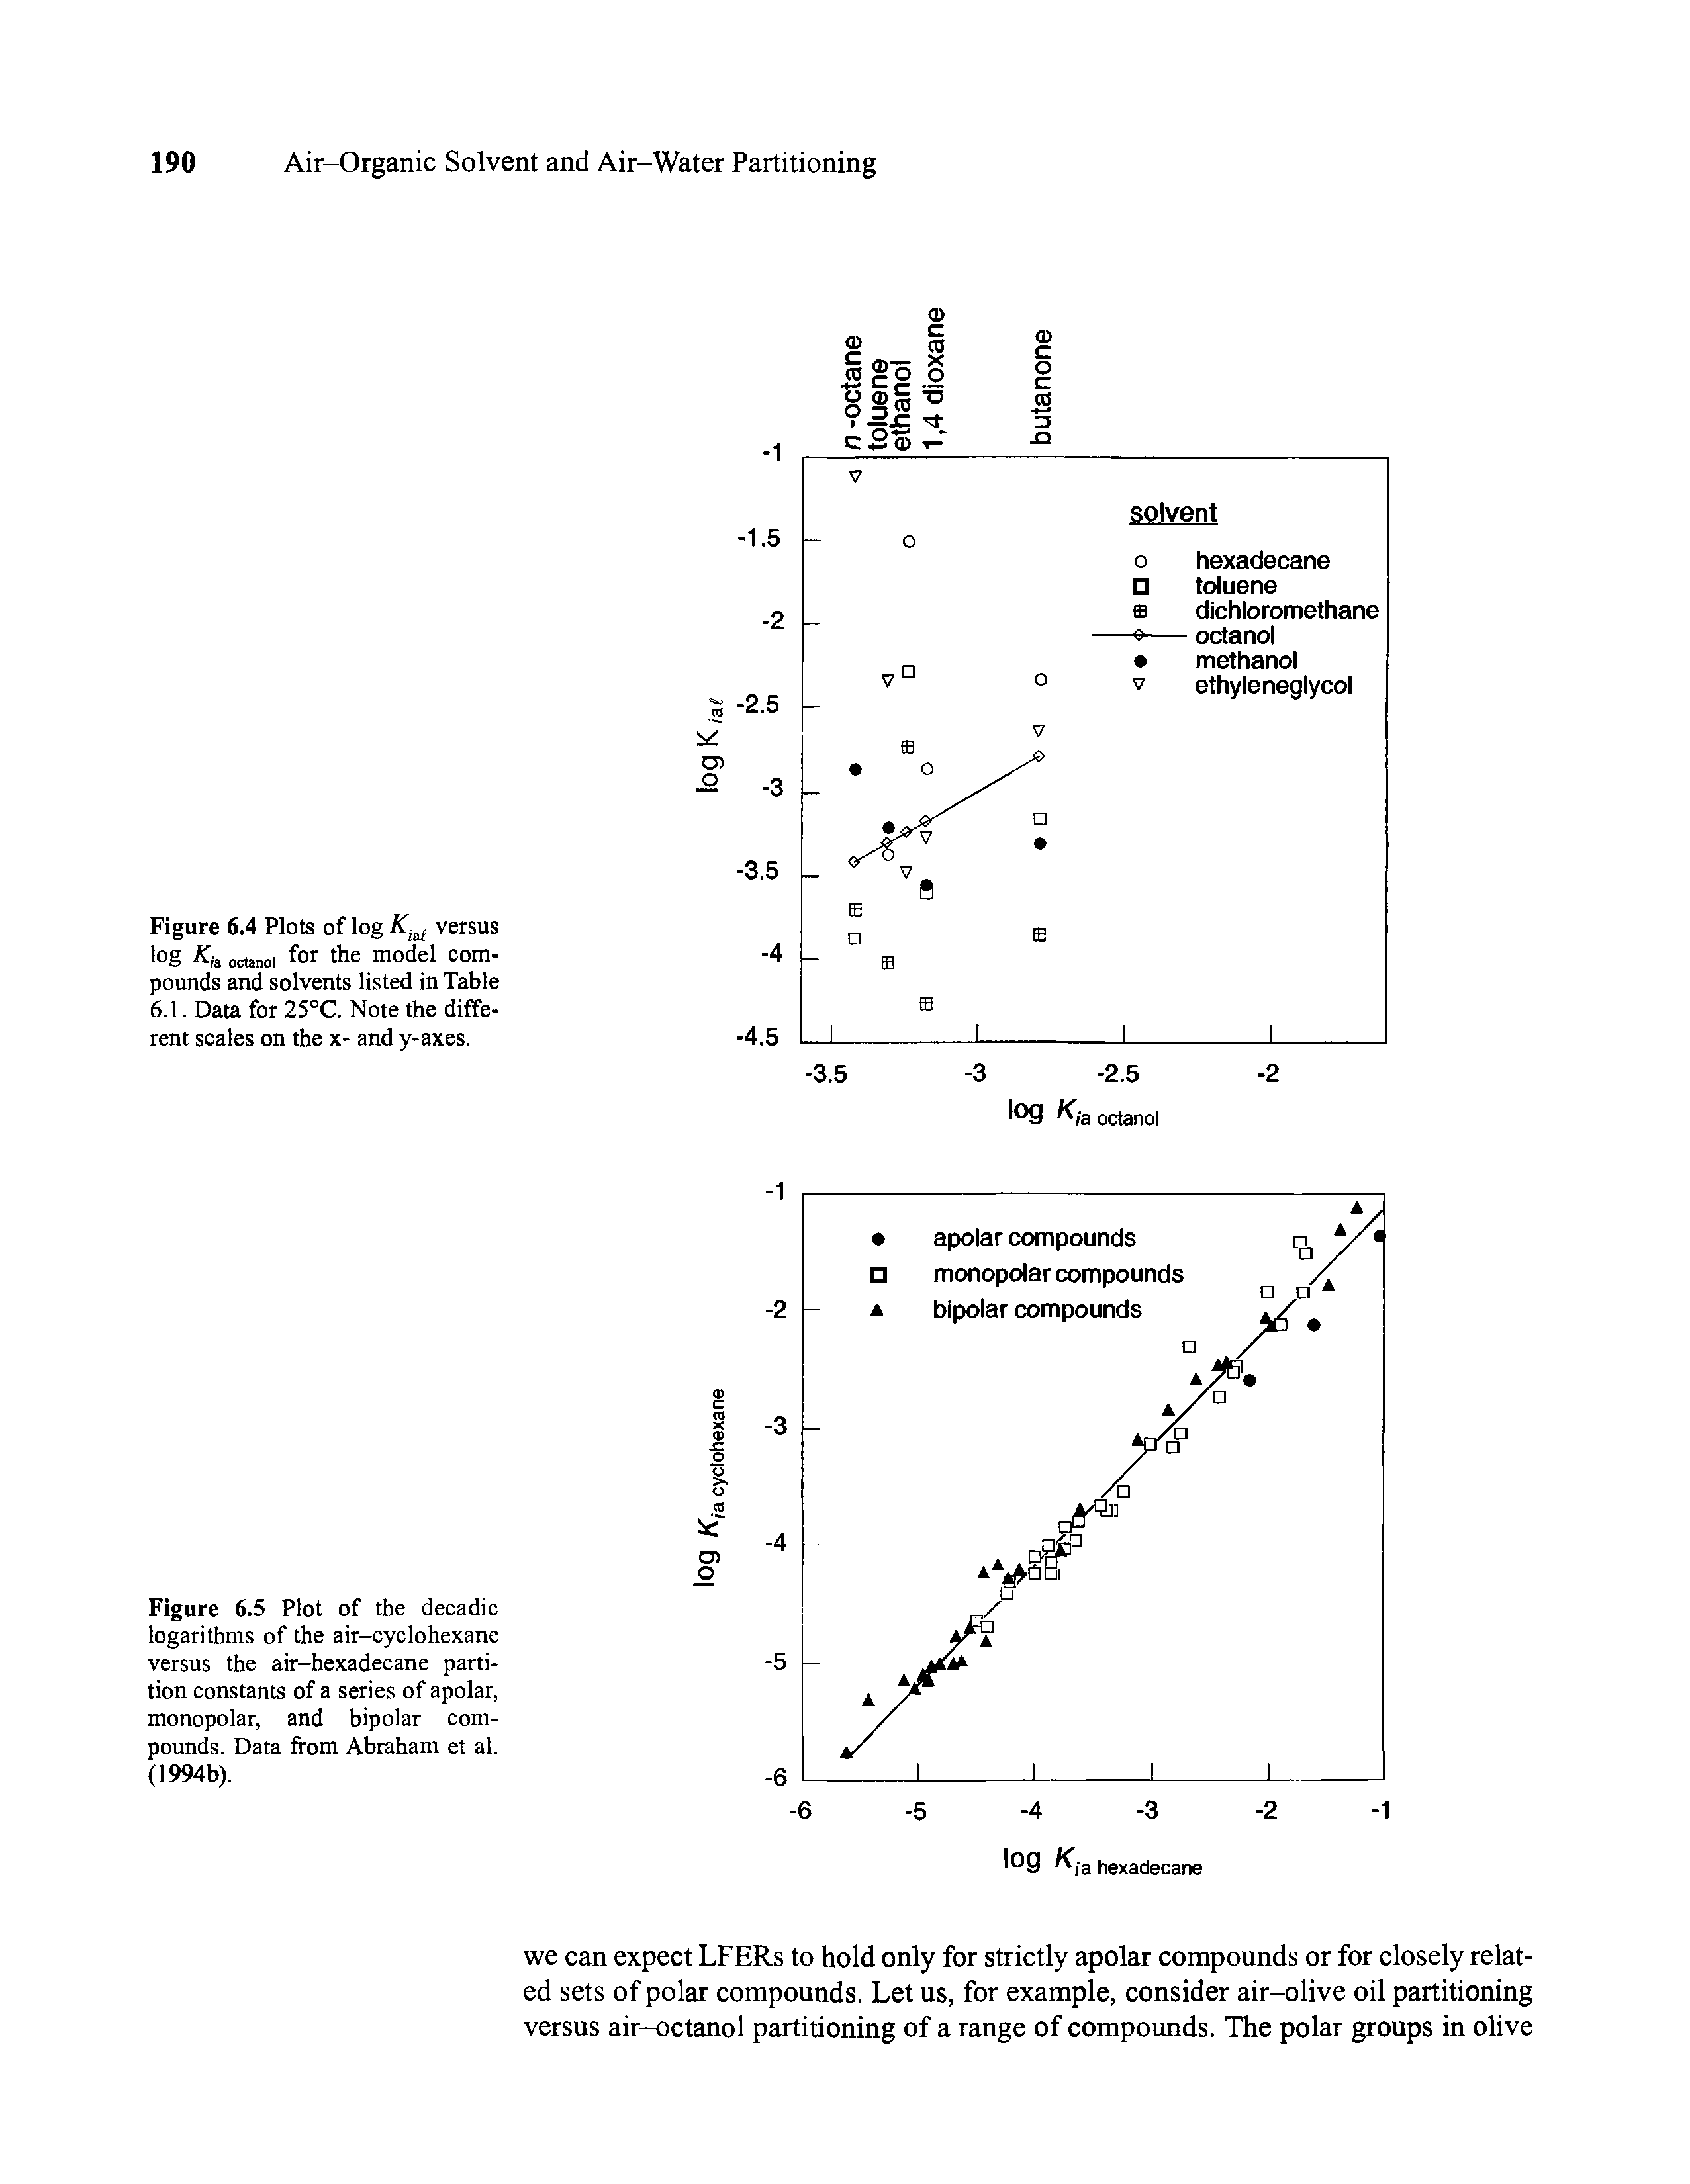 Figure 6.5 Plot of the decadic logarithms of the air-cyclohexane versus the air-hexadecane partition constants of a series of apolar, monopolar, and bipolar compounds. Data from Abraham et al. (1994b).